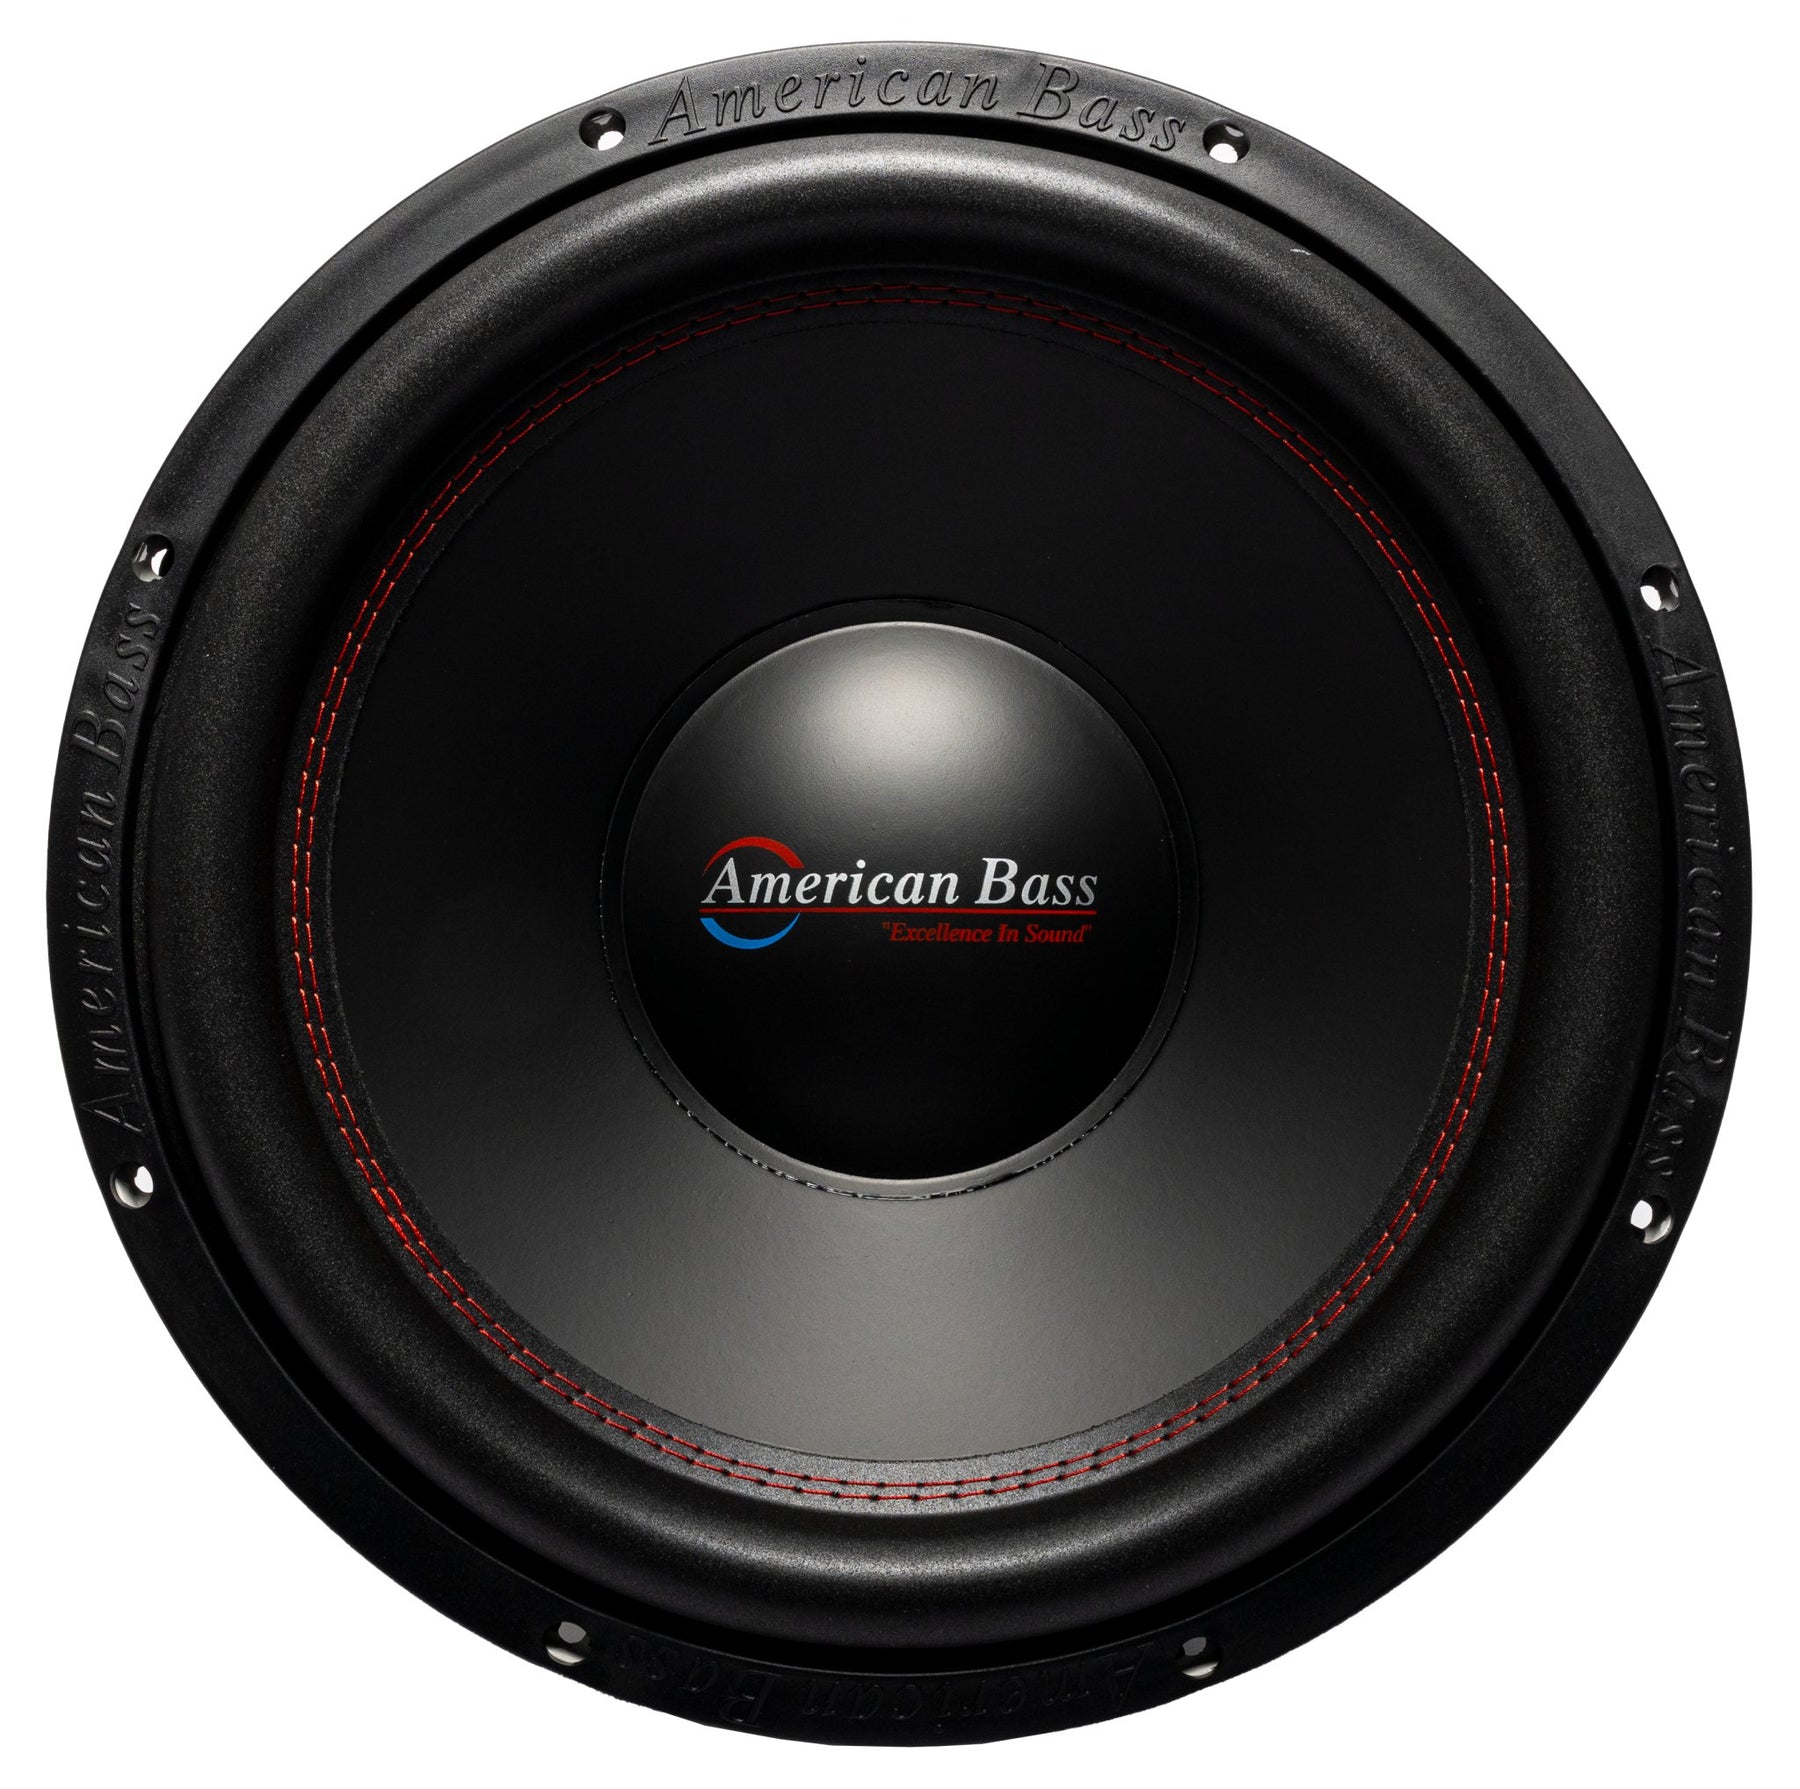 DX 15" Subwoofer - American Bass Audio